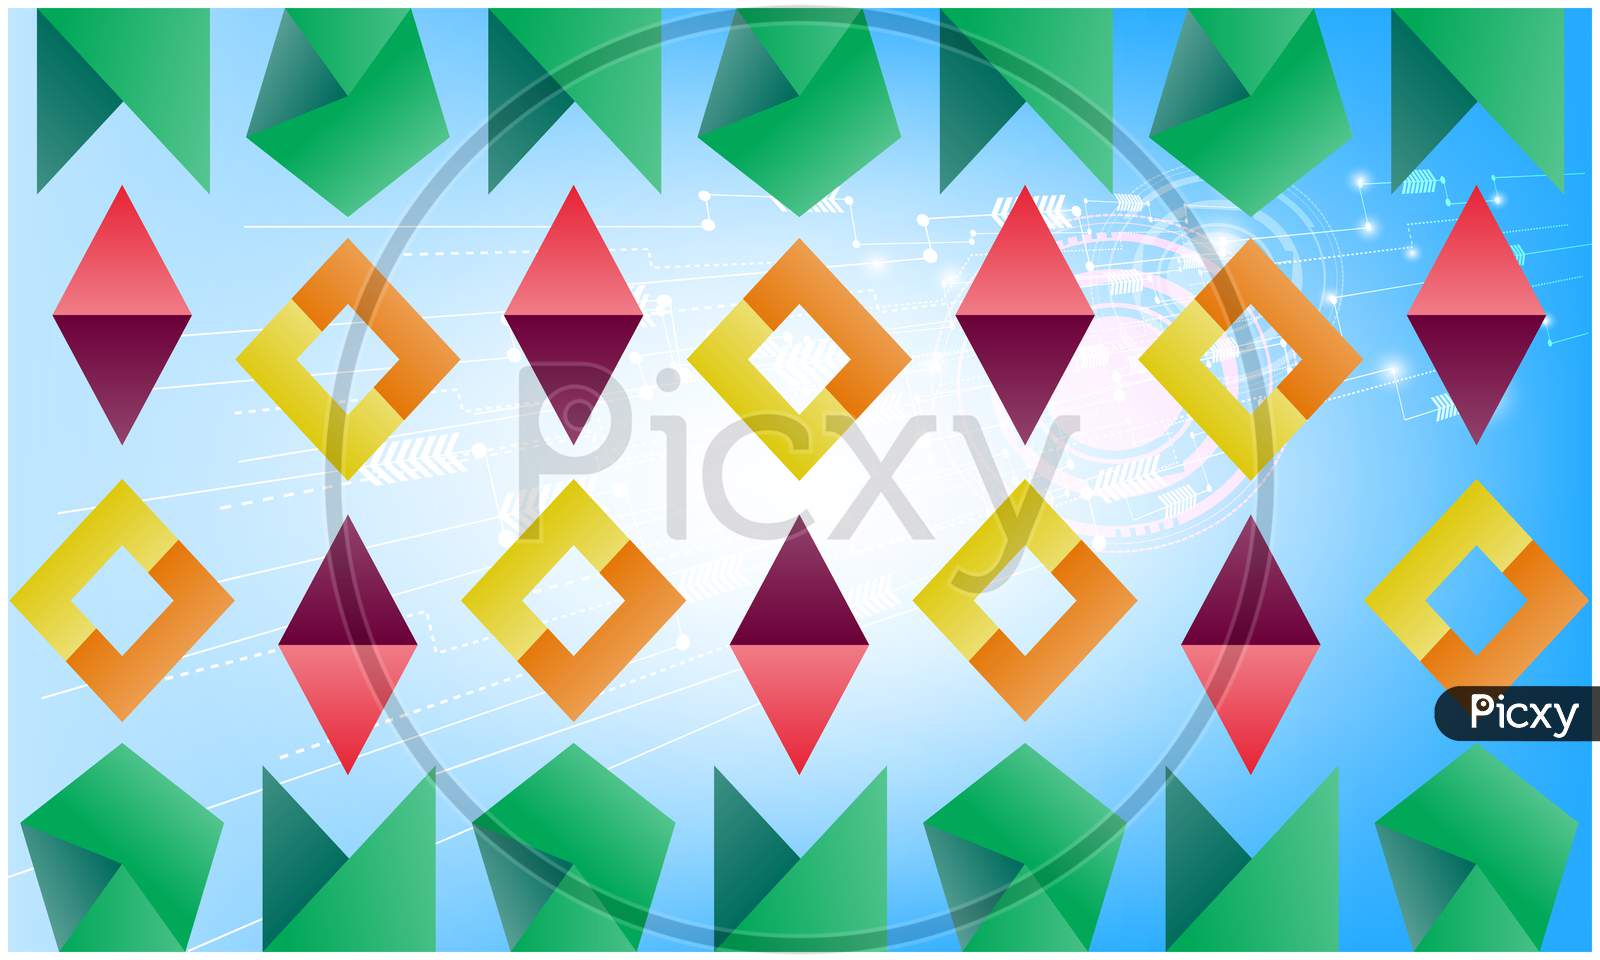 Digital Textile Design Of Polygon Art On Abstract Background